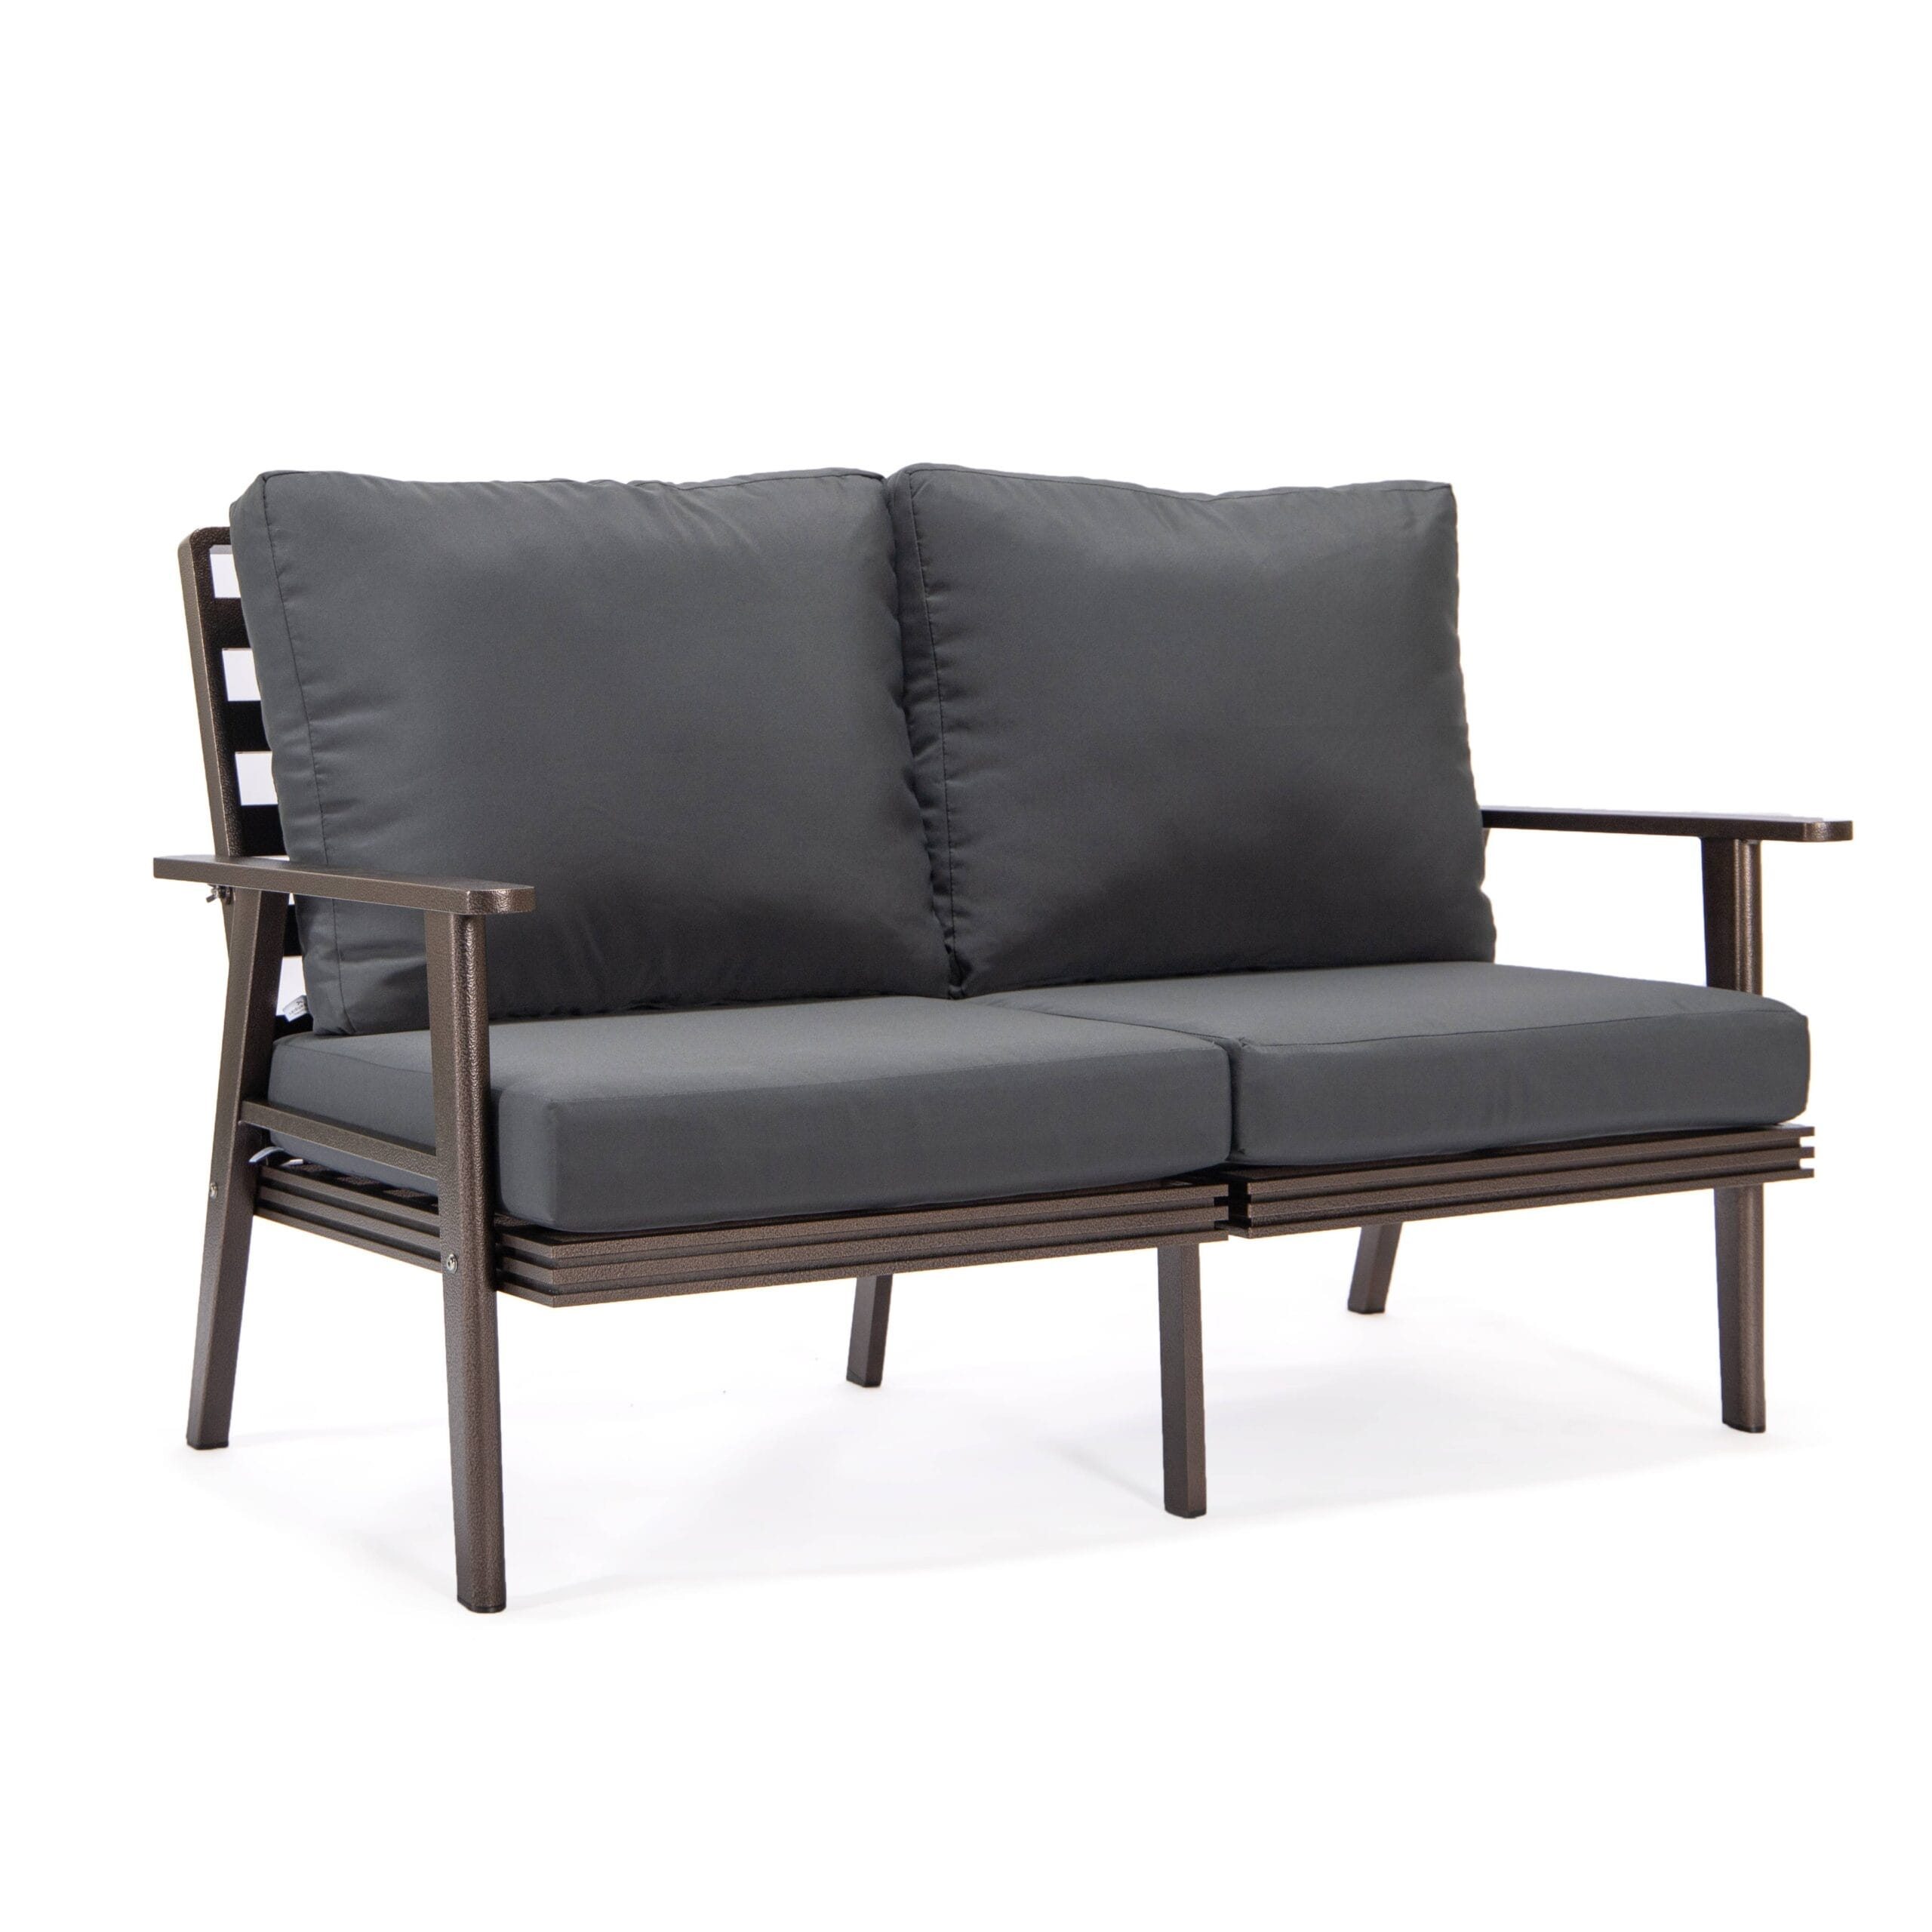 Leisuremod Walbrooke Patio Loveseat With Brown Aluminum Frame And Removable Cushions - 56.69